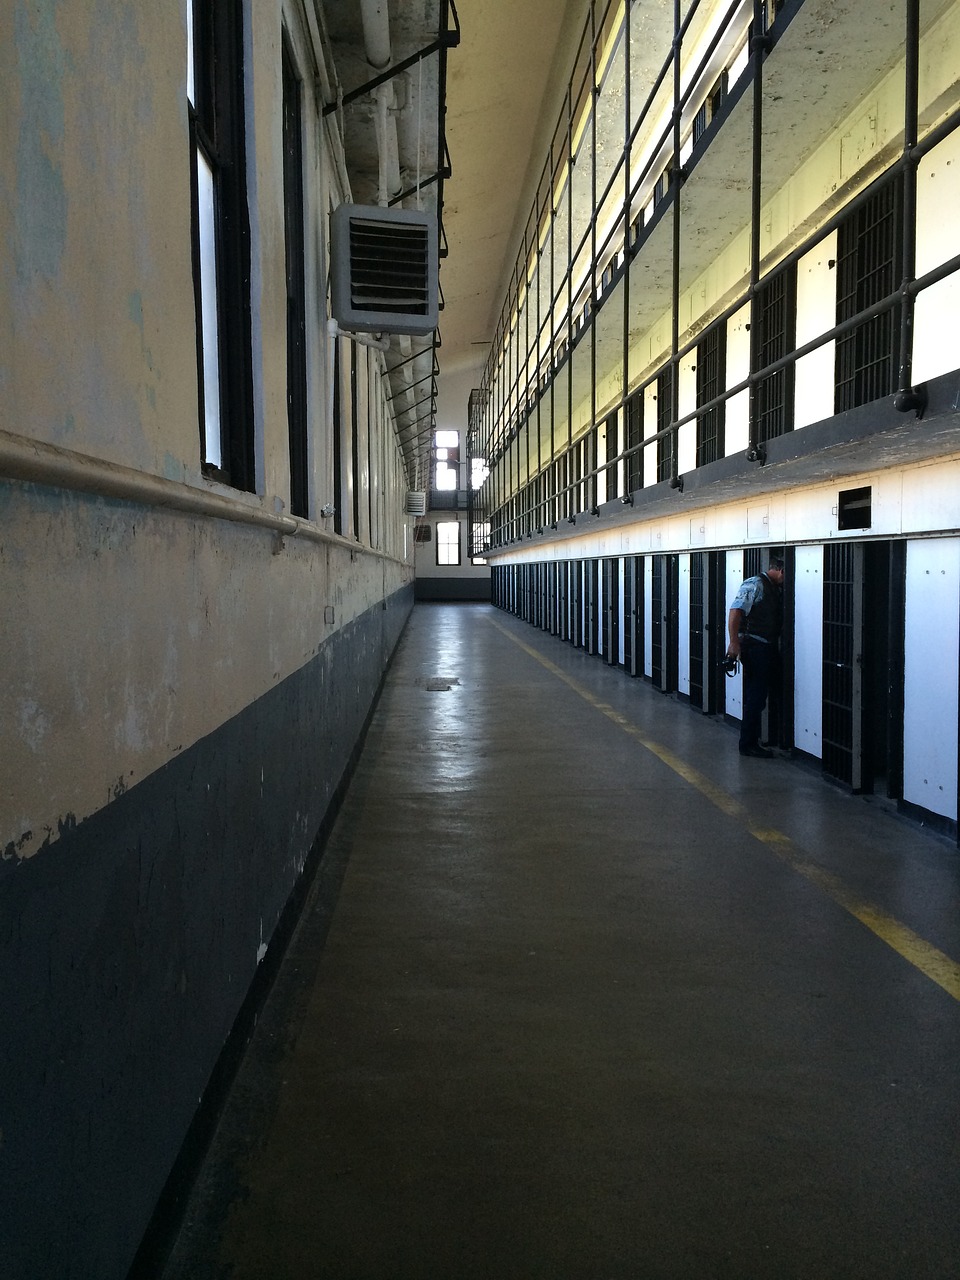 UK parlimentary committee report suggests community sentences to solve strain on prison system